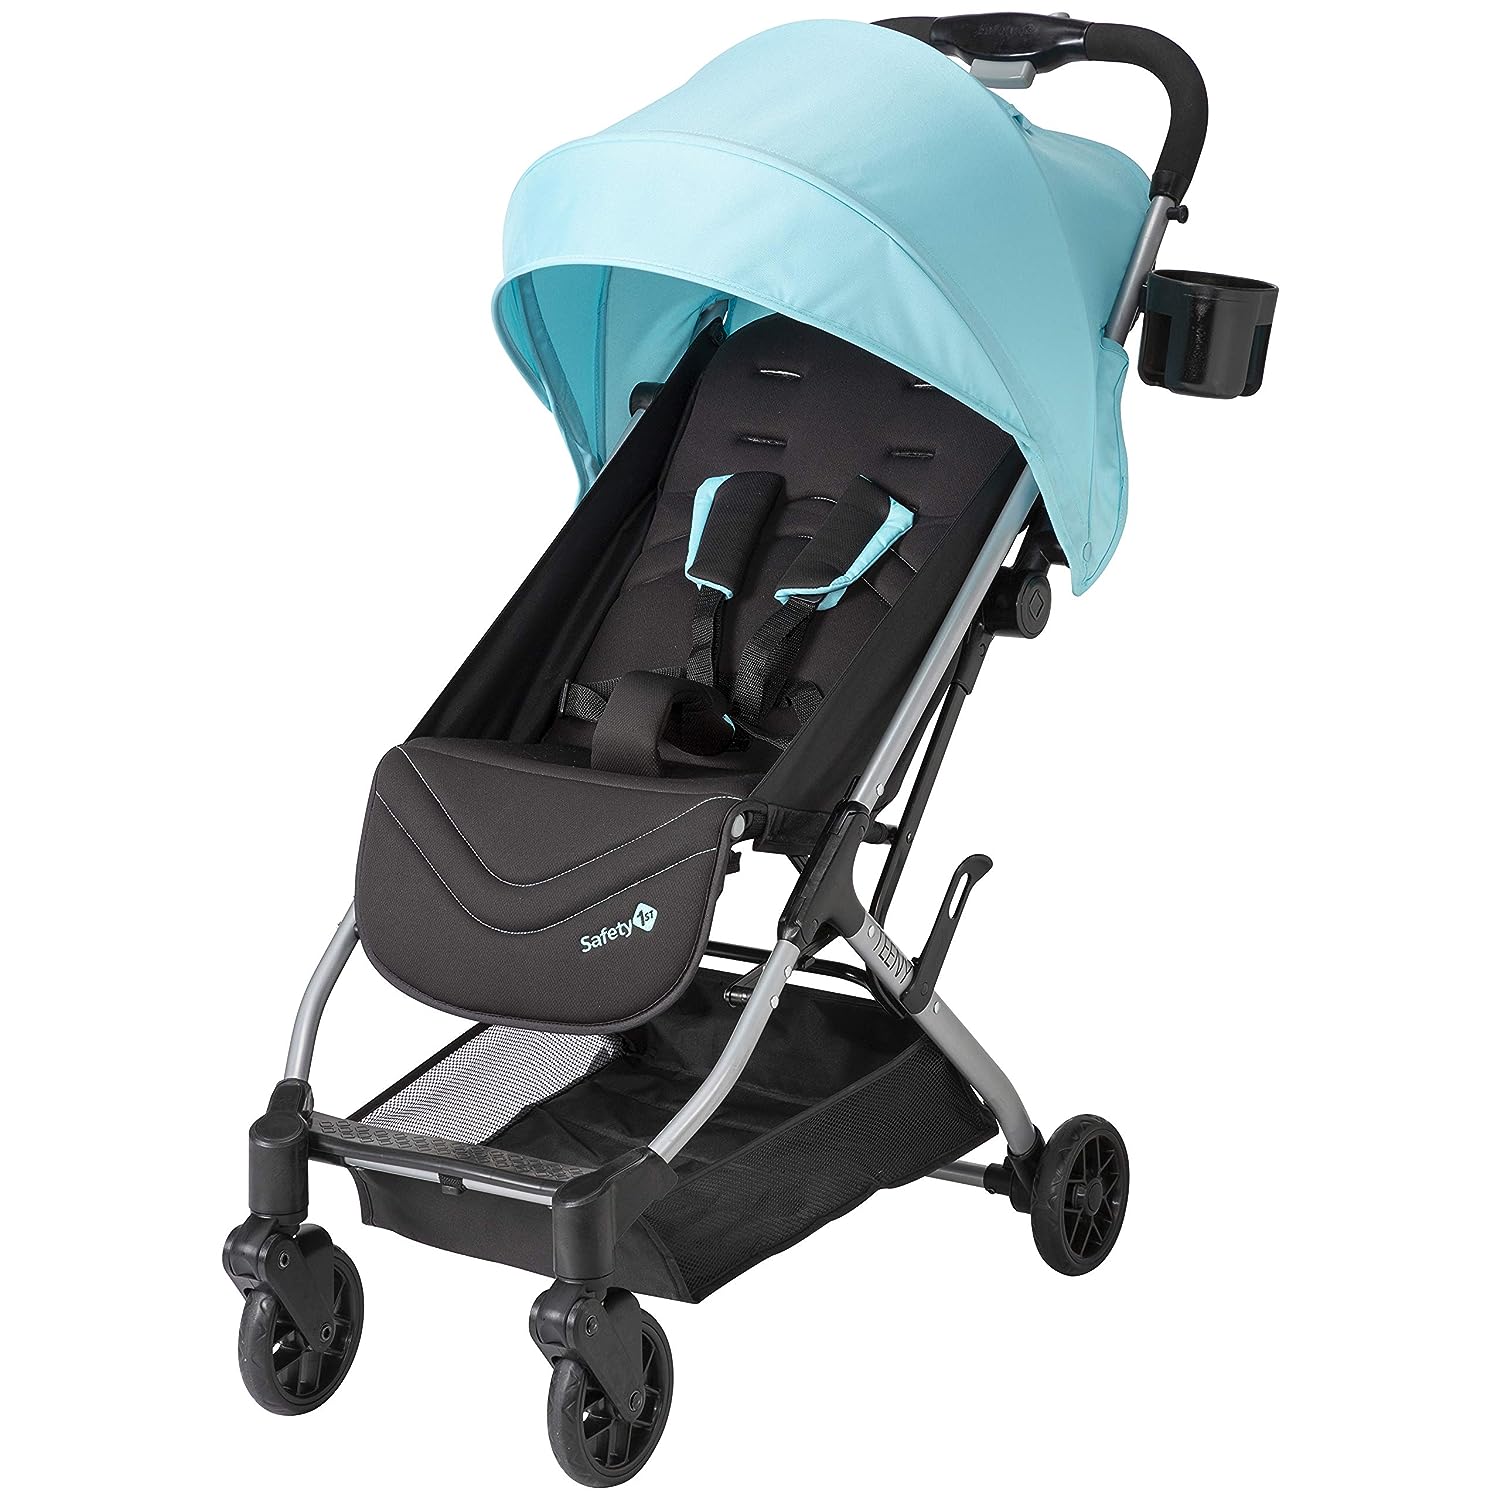 Safety 1st Teeny Ultra Compact Stroller, Bahama Breeze - Bahama Breeze Stroller Review